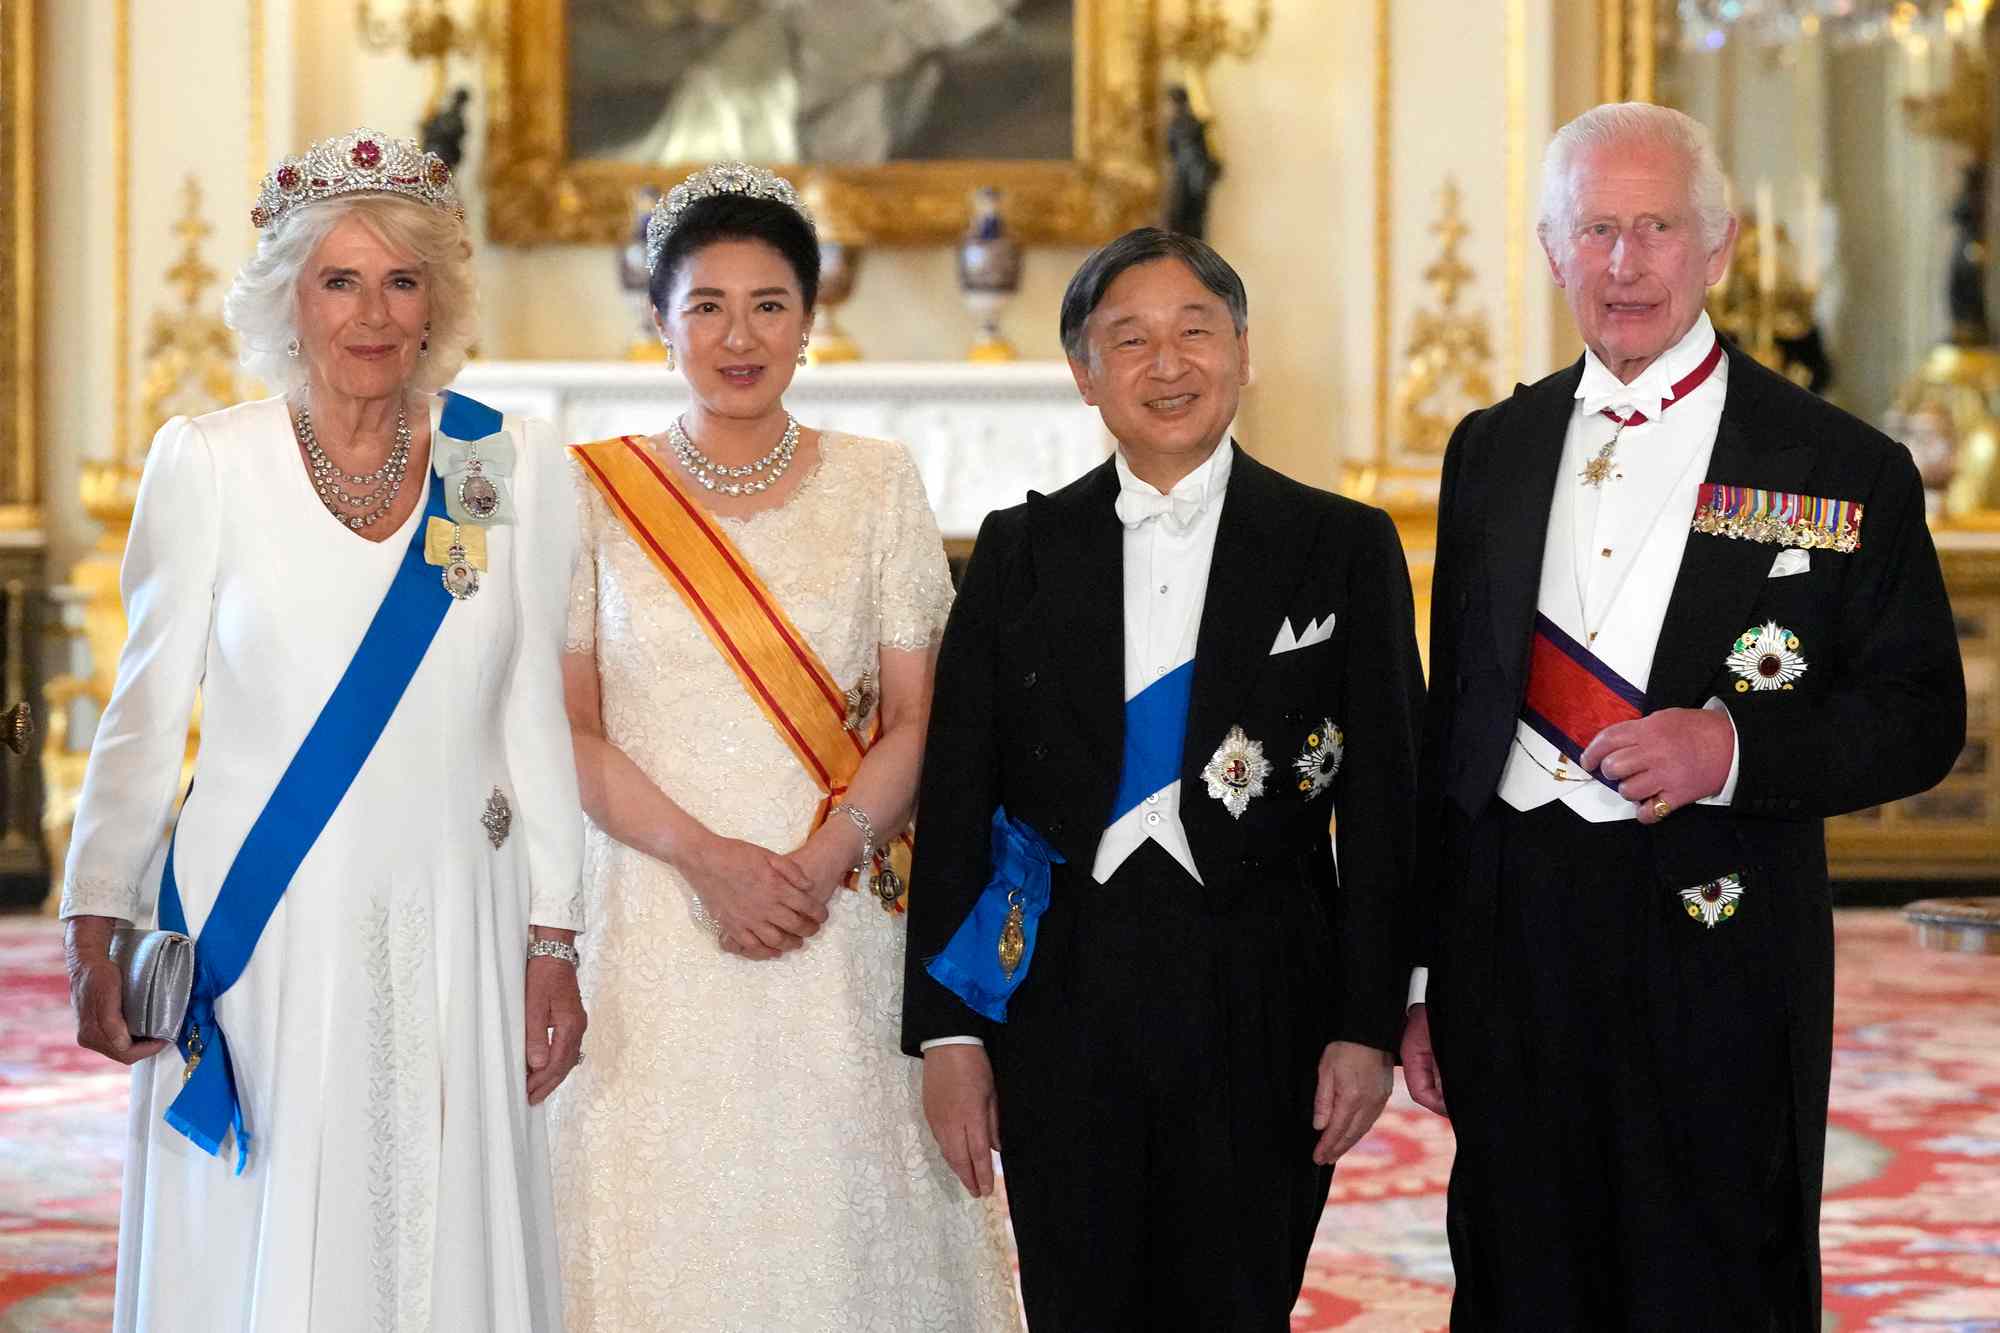 Queen Camilla Goes Glam in Tiara for State Banquet at Buckingham Palace with King Charles and Prince William